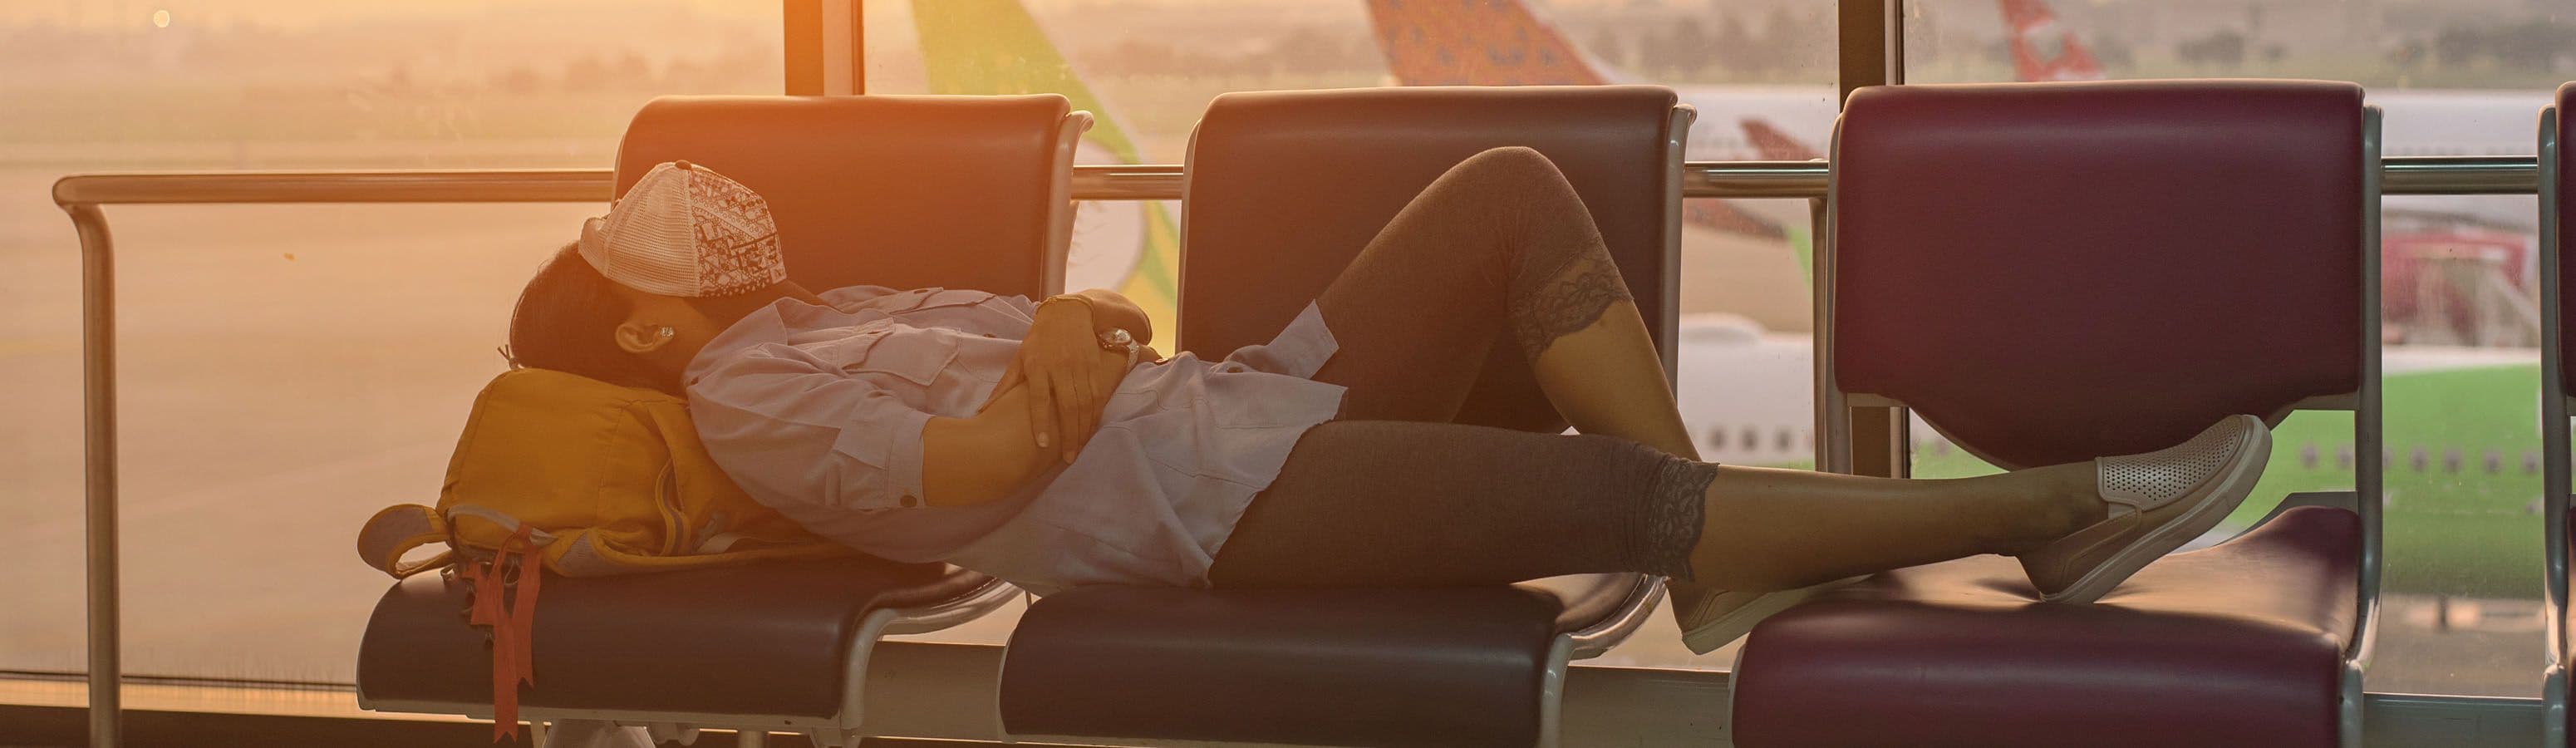 A few tips on how to get the best sleep at the airport